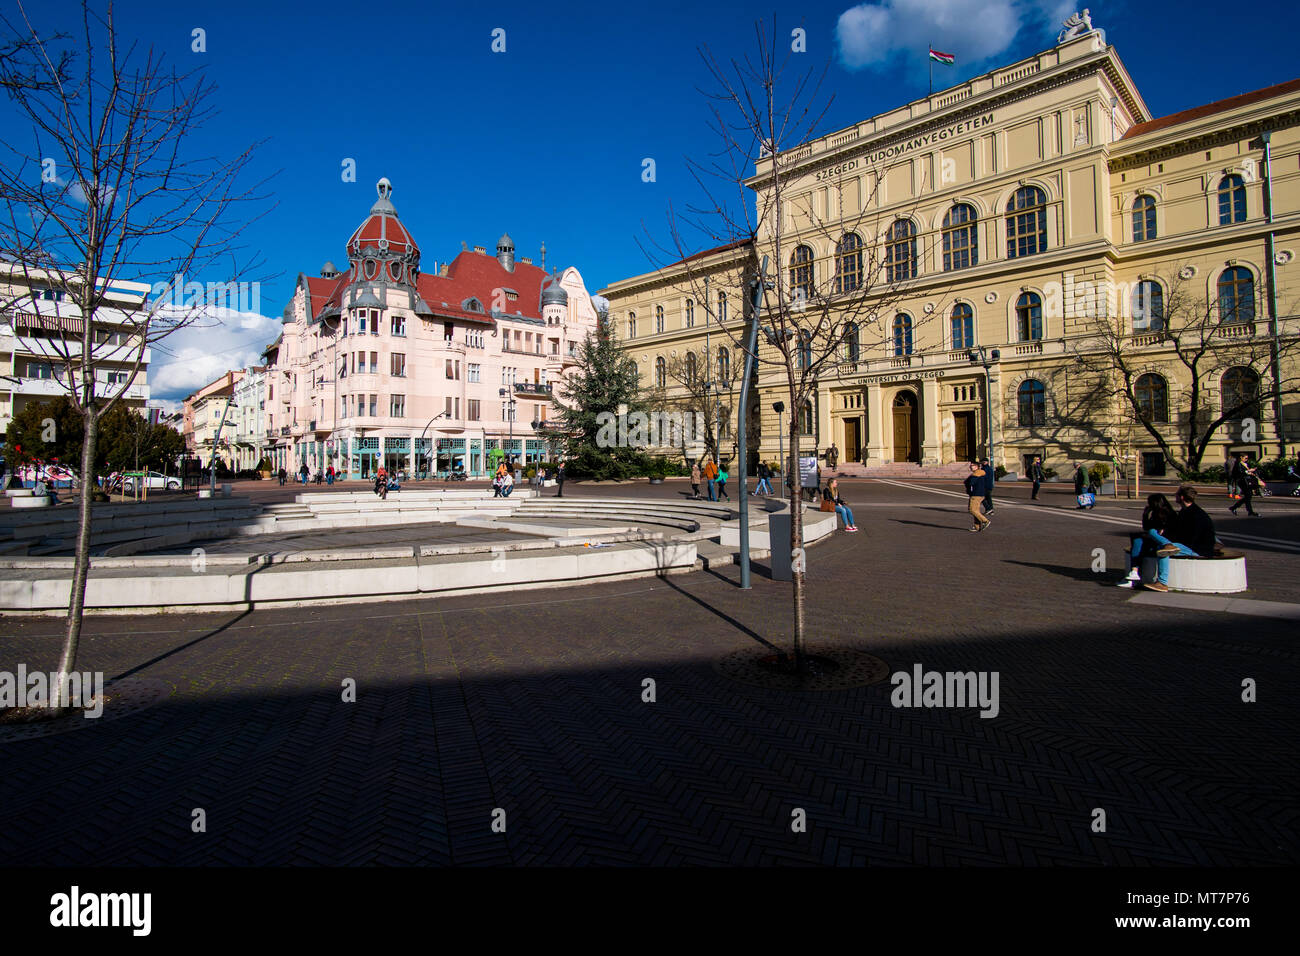 Szeged, Hungary - March 13, 2018: Dugonics square in the center of Szeged with University building on the right Stock Photo